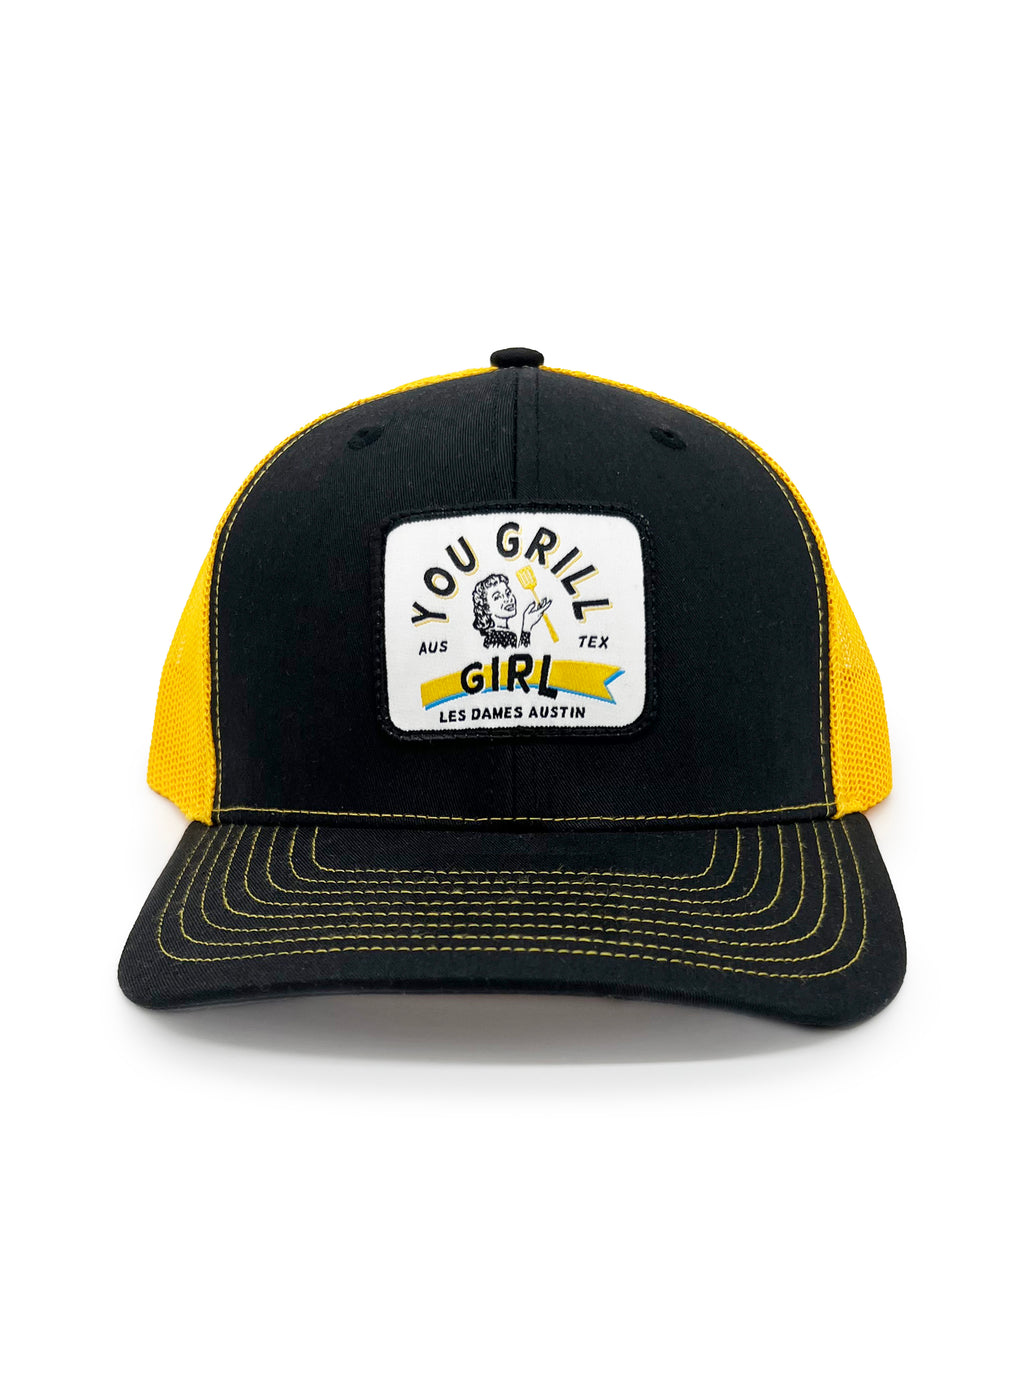 Yellow and black hat that has a white patch on the front with a drawing of a 1950s looking lady holding a spatula. Around the image it says "You Grill Girl". Below that it says "Aus Tex. Les Dames Austin". 